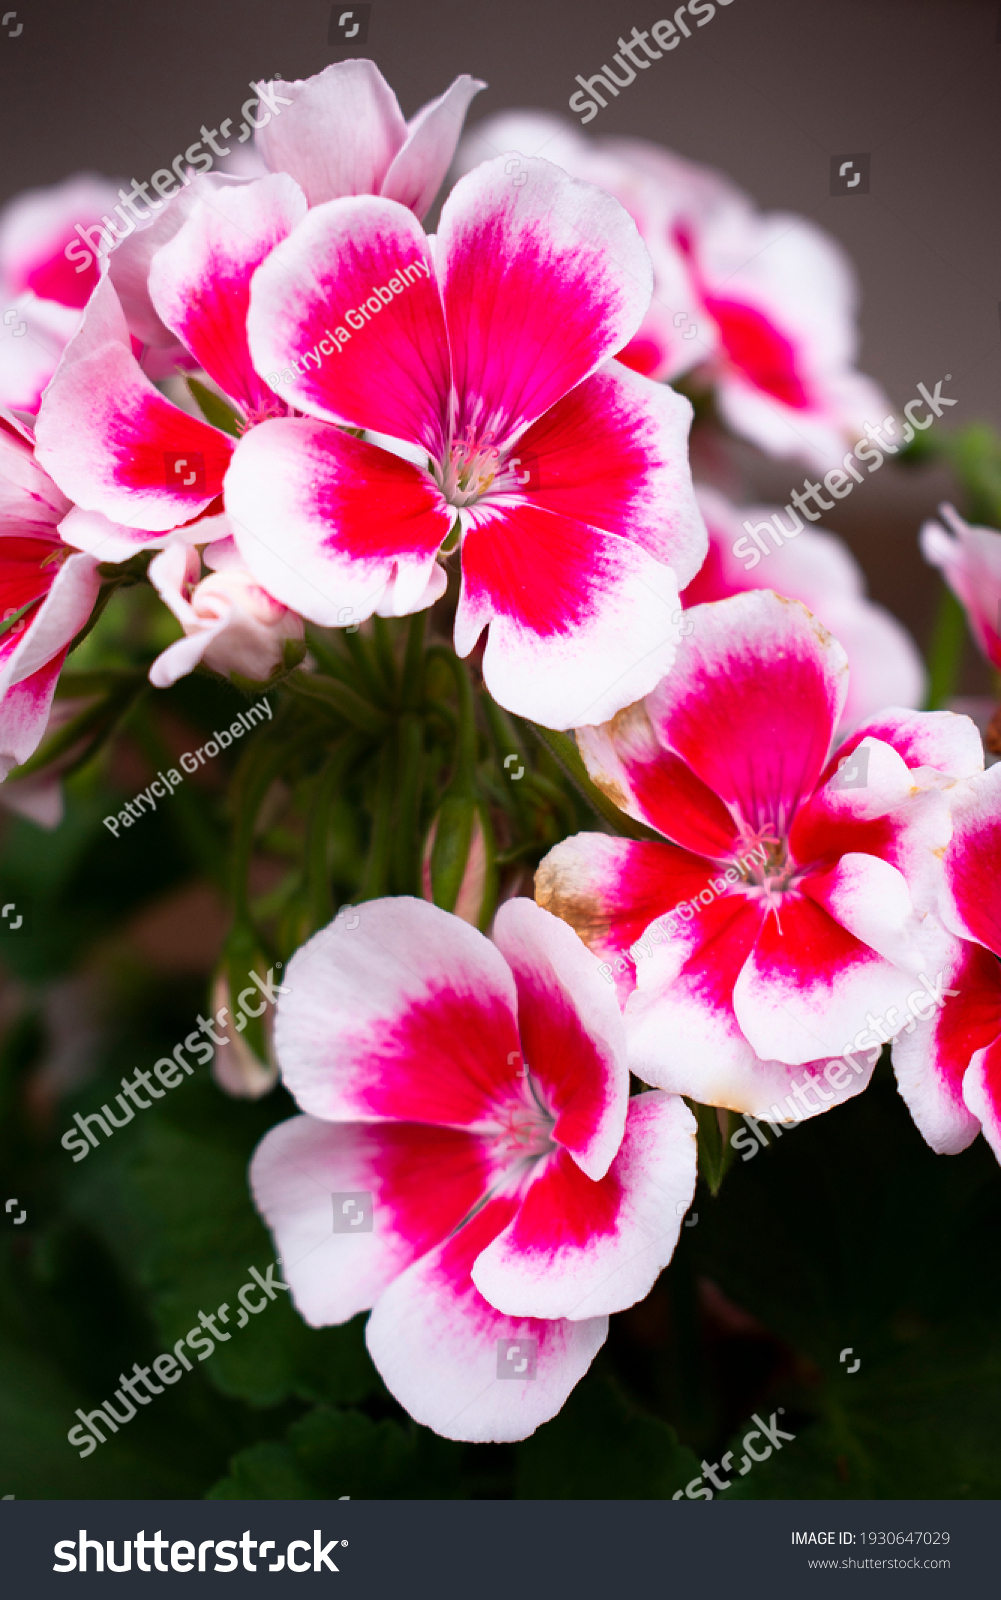 Vibrant pelargonium blooming flowers ( geraniums, pelargoniums, storks bills) flowers with ornamental white outlines in a flower pot in the summer or spring garden #1930647029